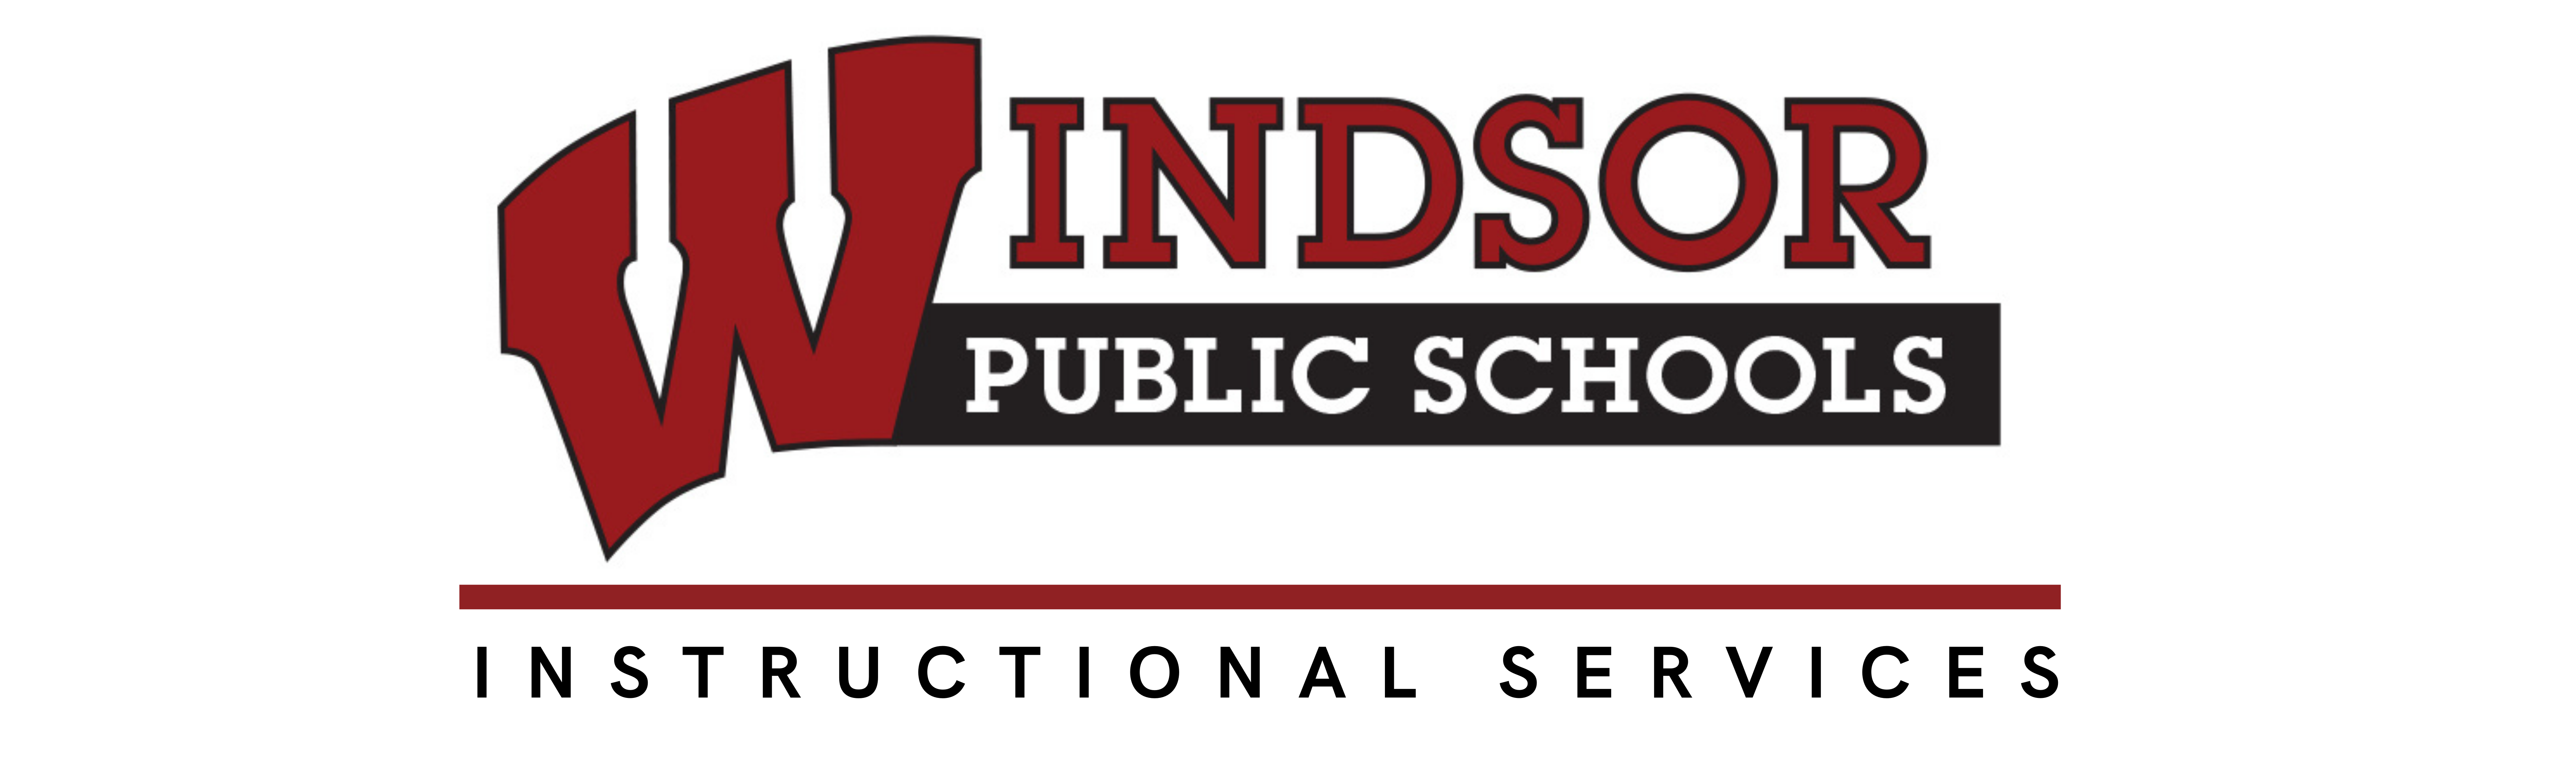 instructional services